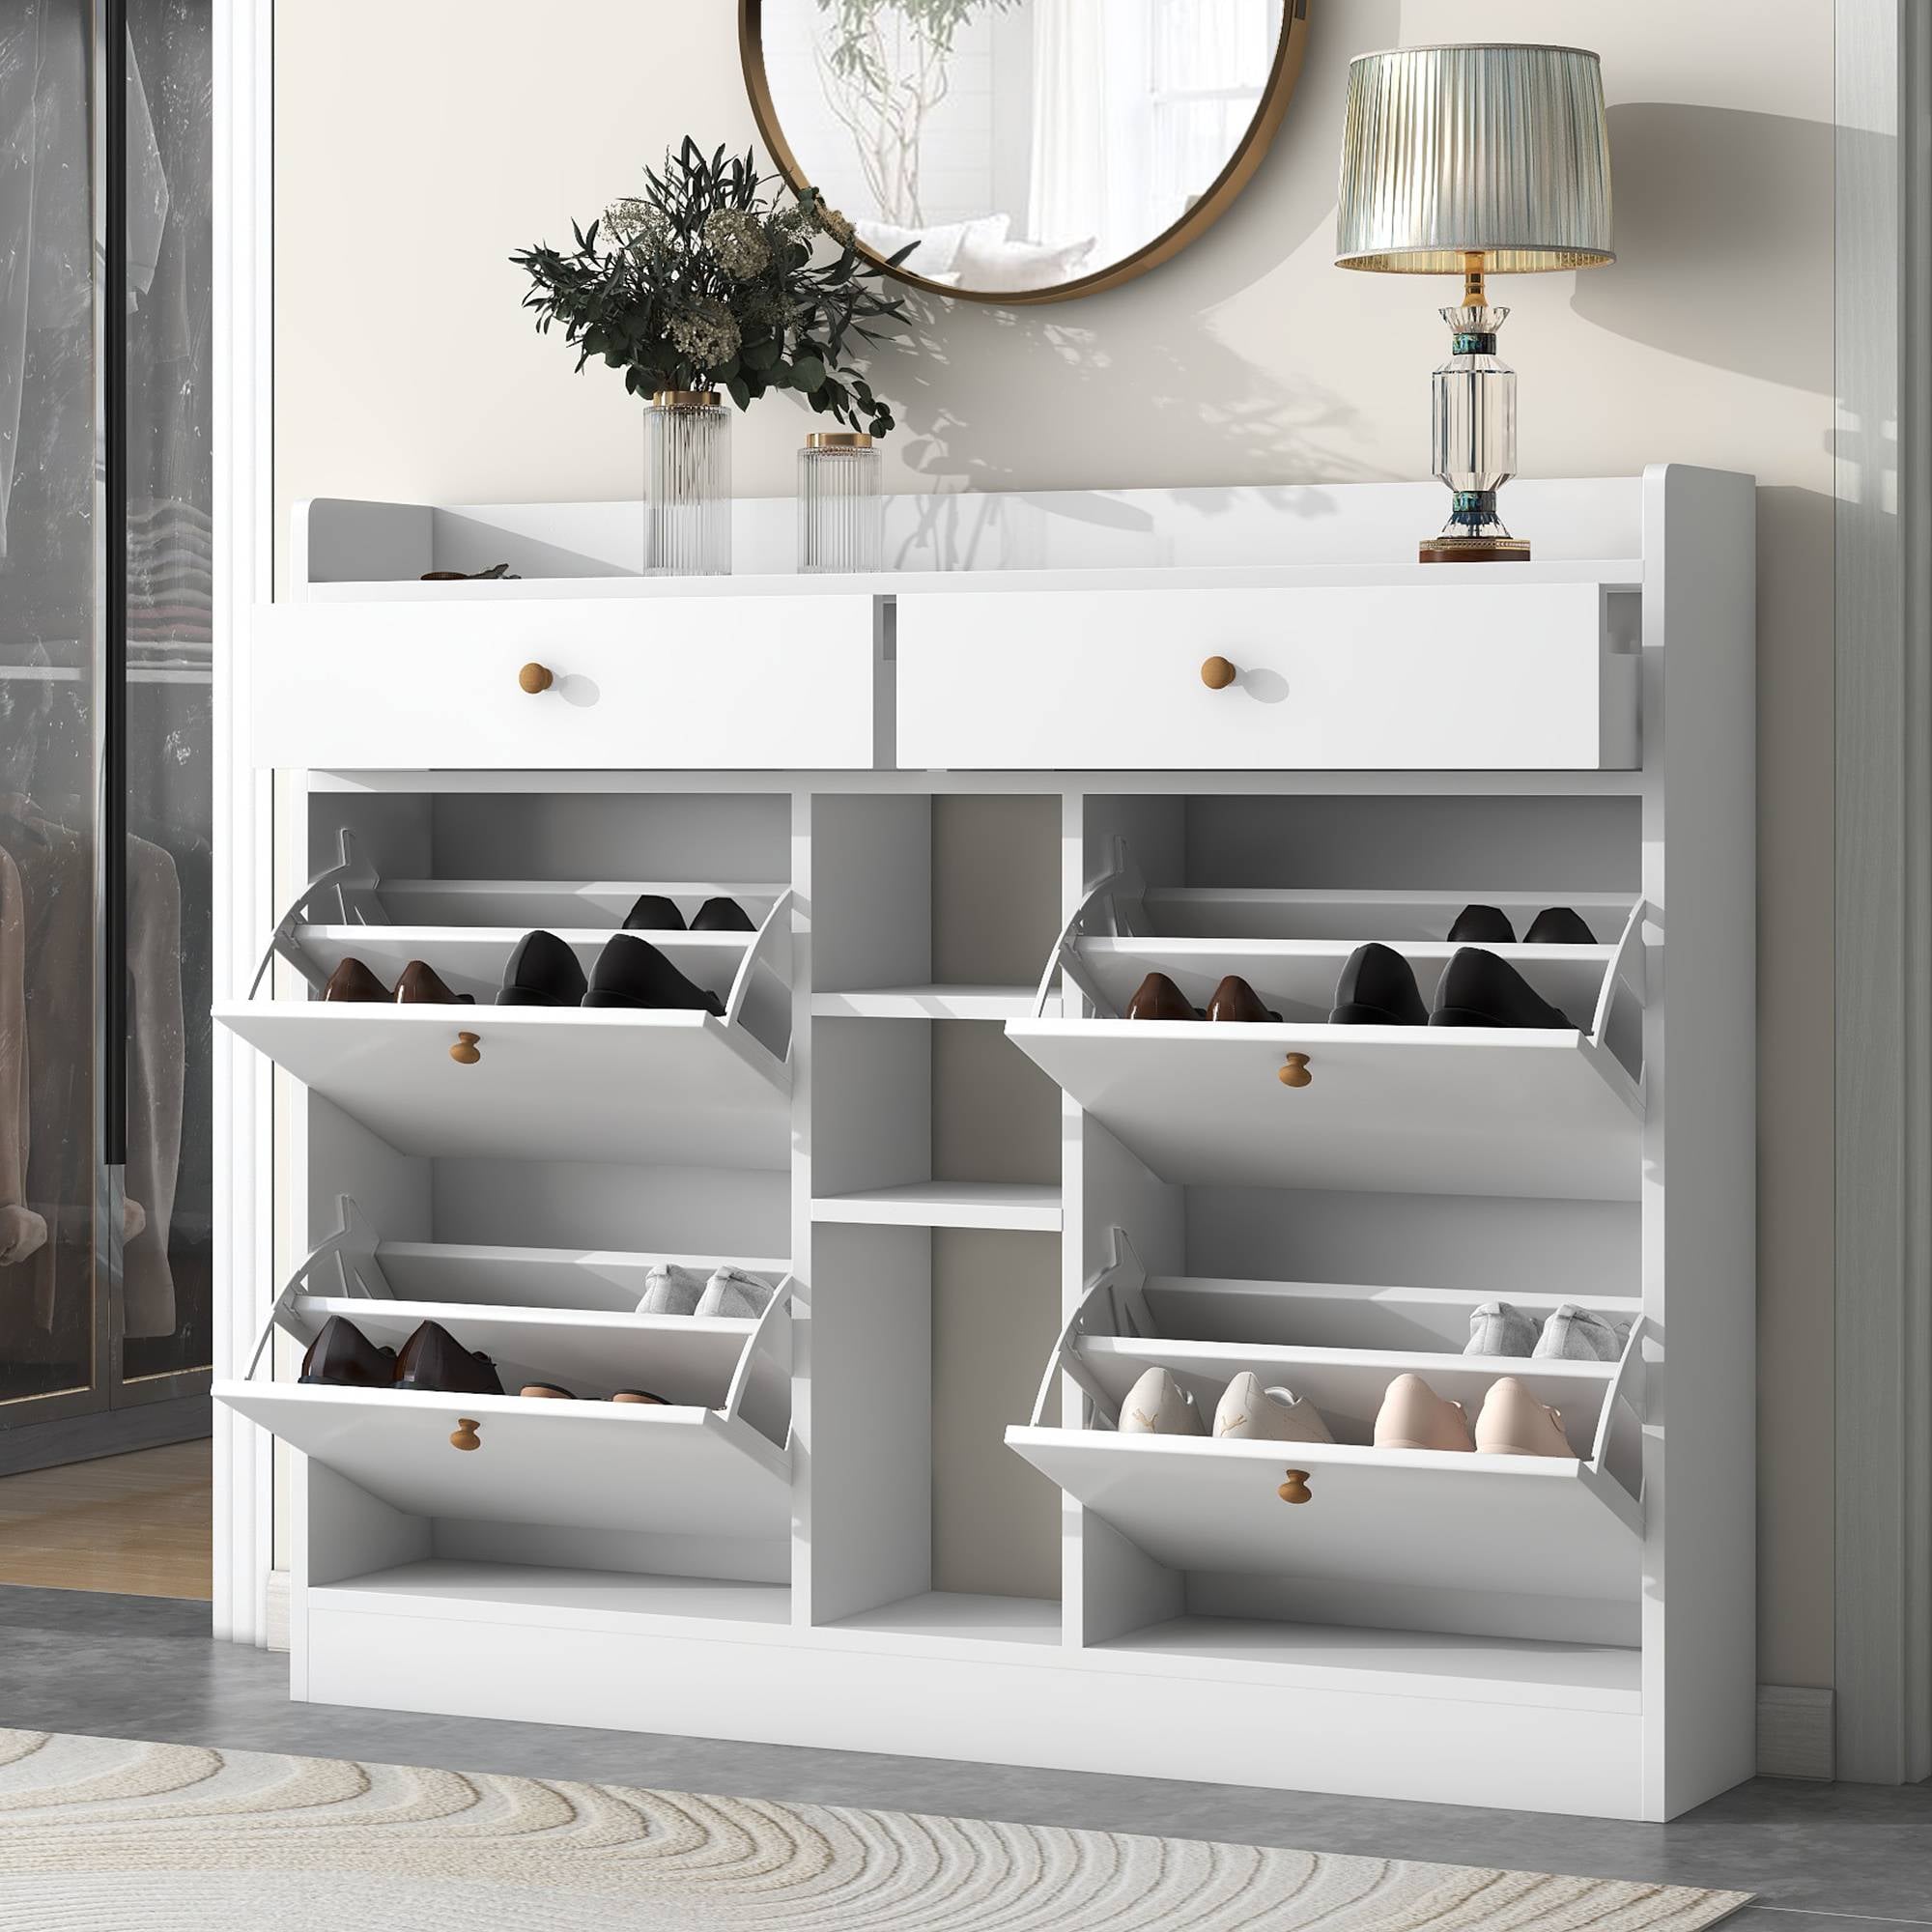 Yiekholo White Shoe Storage Cabinet with 4 Flip Drawers and Open Shelves, Freestanding Shoe Organizer for 18 Pairs, MDF Construction | LL-984AAK